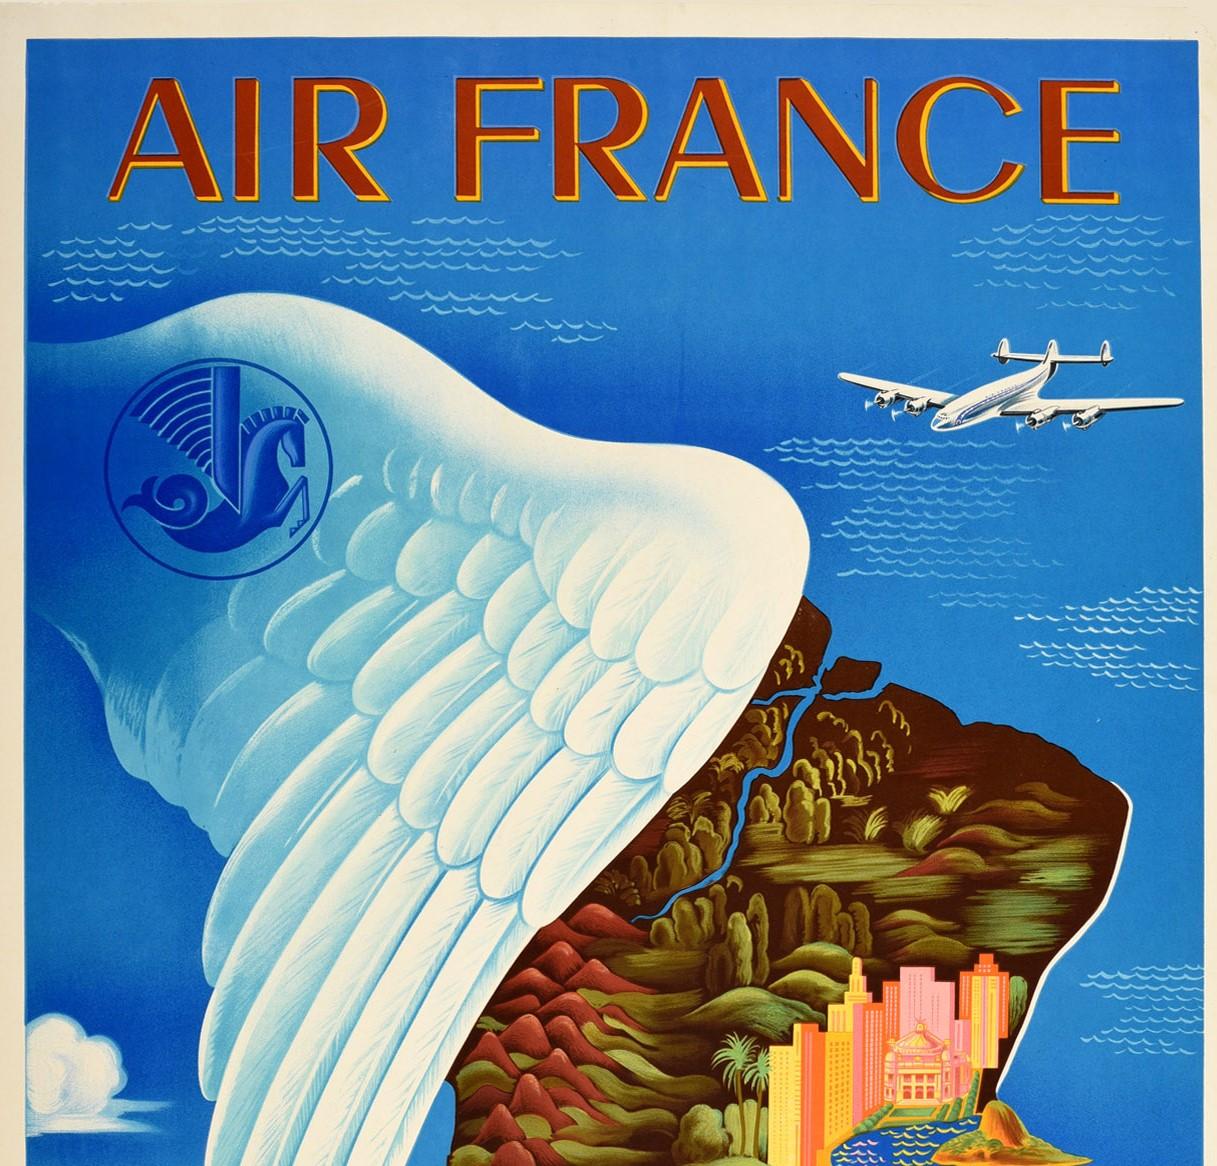 Original vintage travel poster advertising flights to South America / America Del Sur by Air France featuring a colorful stylized design by Lucien Boucher (1889-1971) depicting historic buildings and city skyscrapers, jungle forests, palm trees,